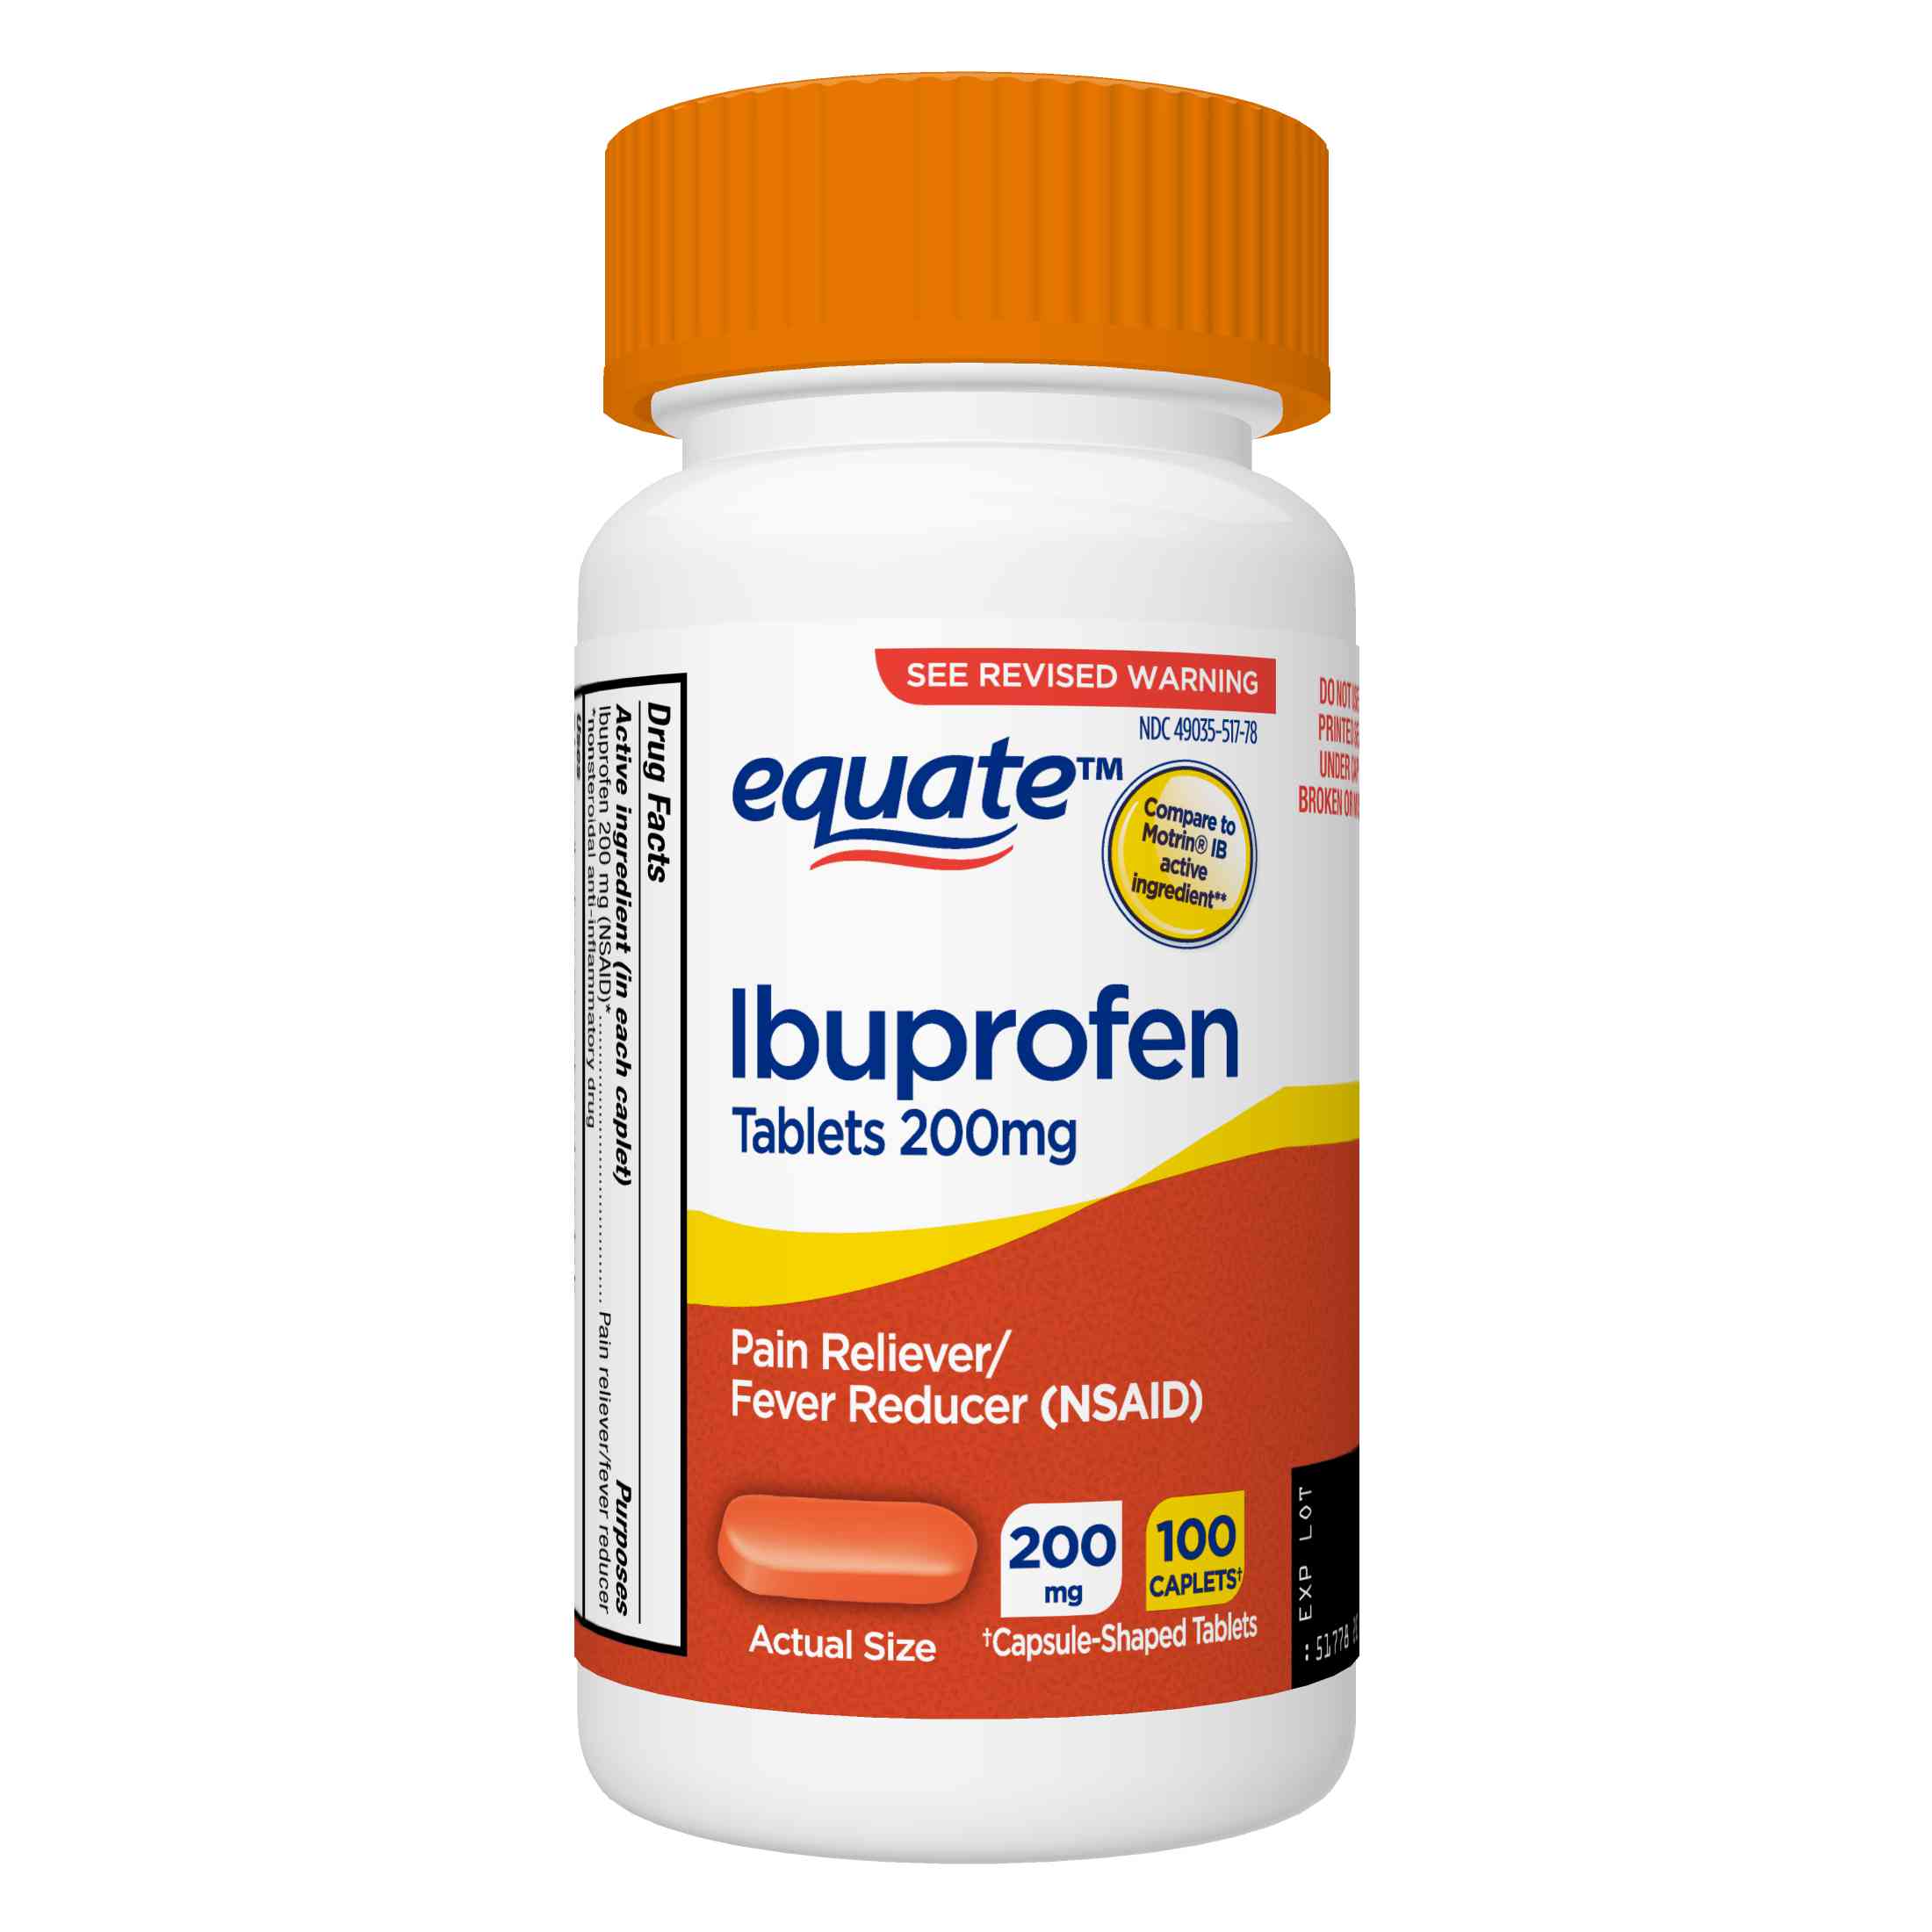 Equate Ibuprofen Tablets 200 mg, Pain Reliever and Fever Reducer, 100 Count - image 1 of 7